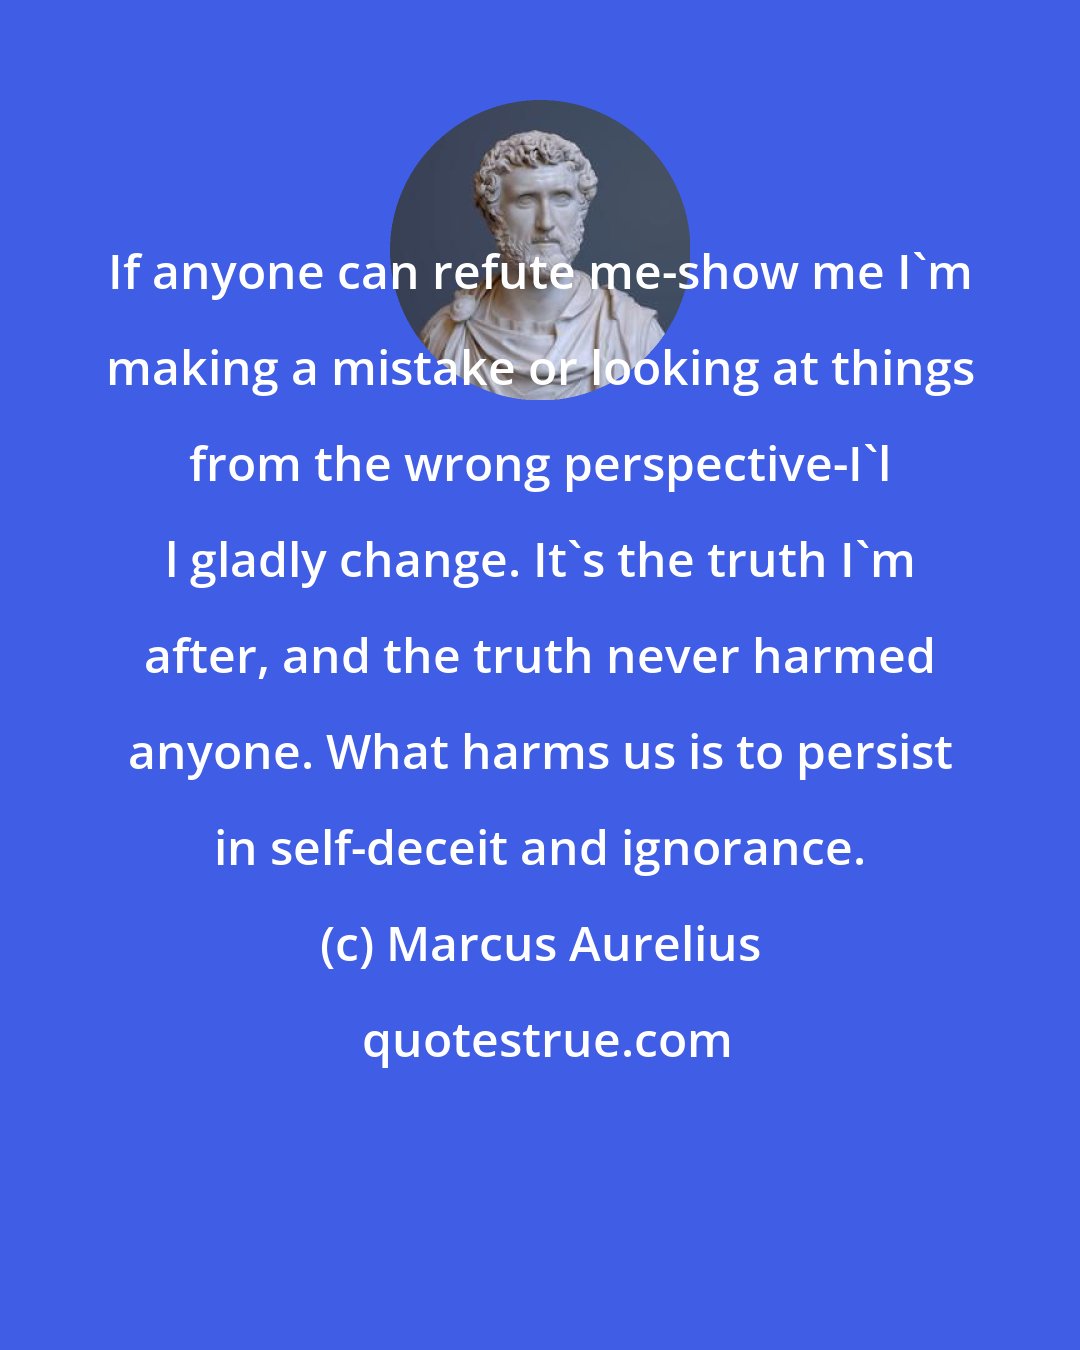 Marcus Aurelius: If anyone can refute me-show me I'm making a mistake or looking at things from the wrong perspective-I'l l gladly change. It's the truth I'm after, and the truth never harmed anyone. What harms us is to persist in self-deceit and ignorance.